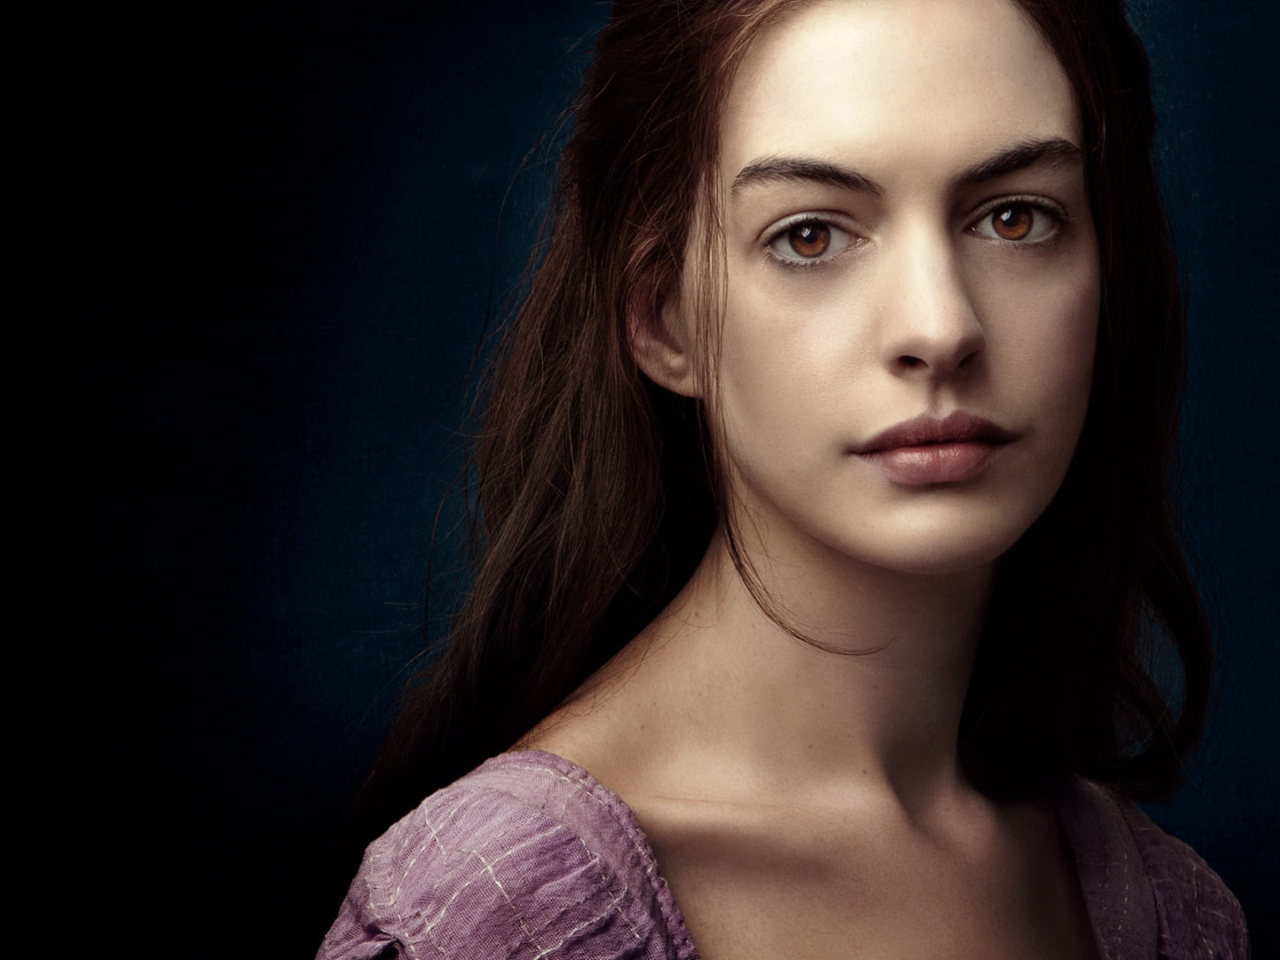 Anne Hathaway In Les Miserables screenshot #1 1280x960